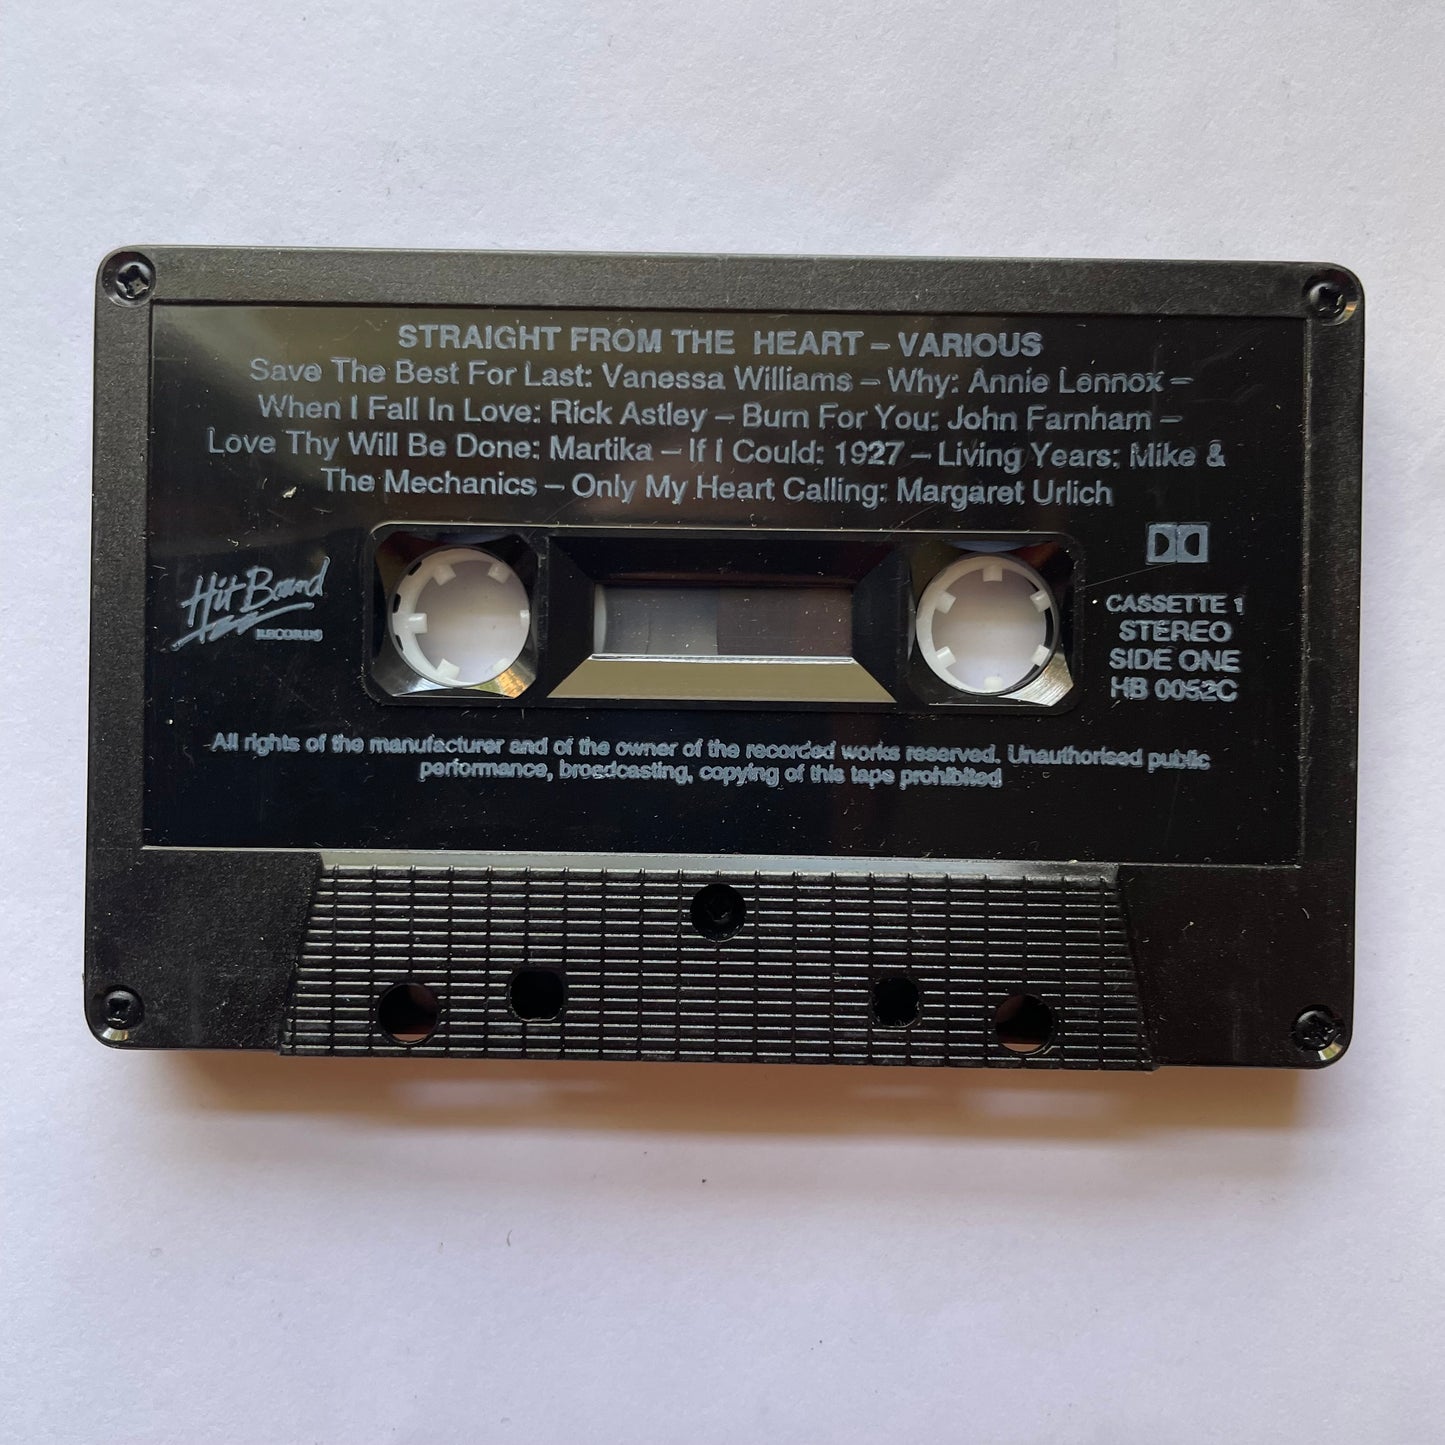 Tape Cassette Straight From The Heart side 3 